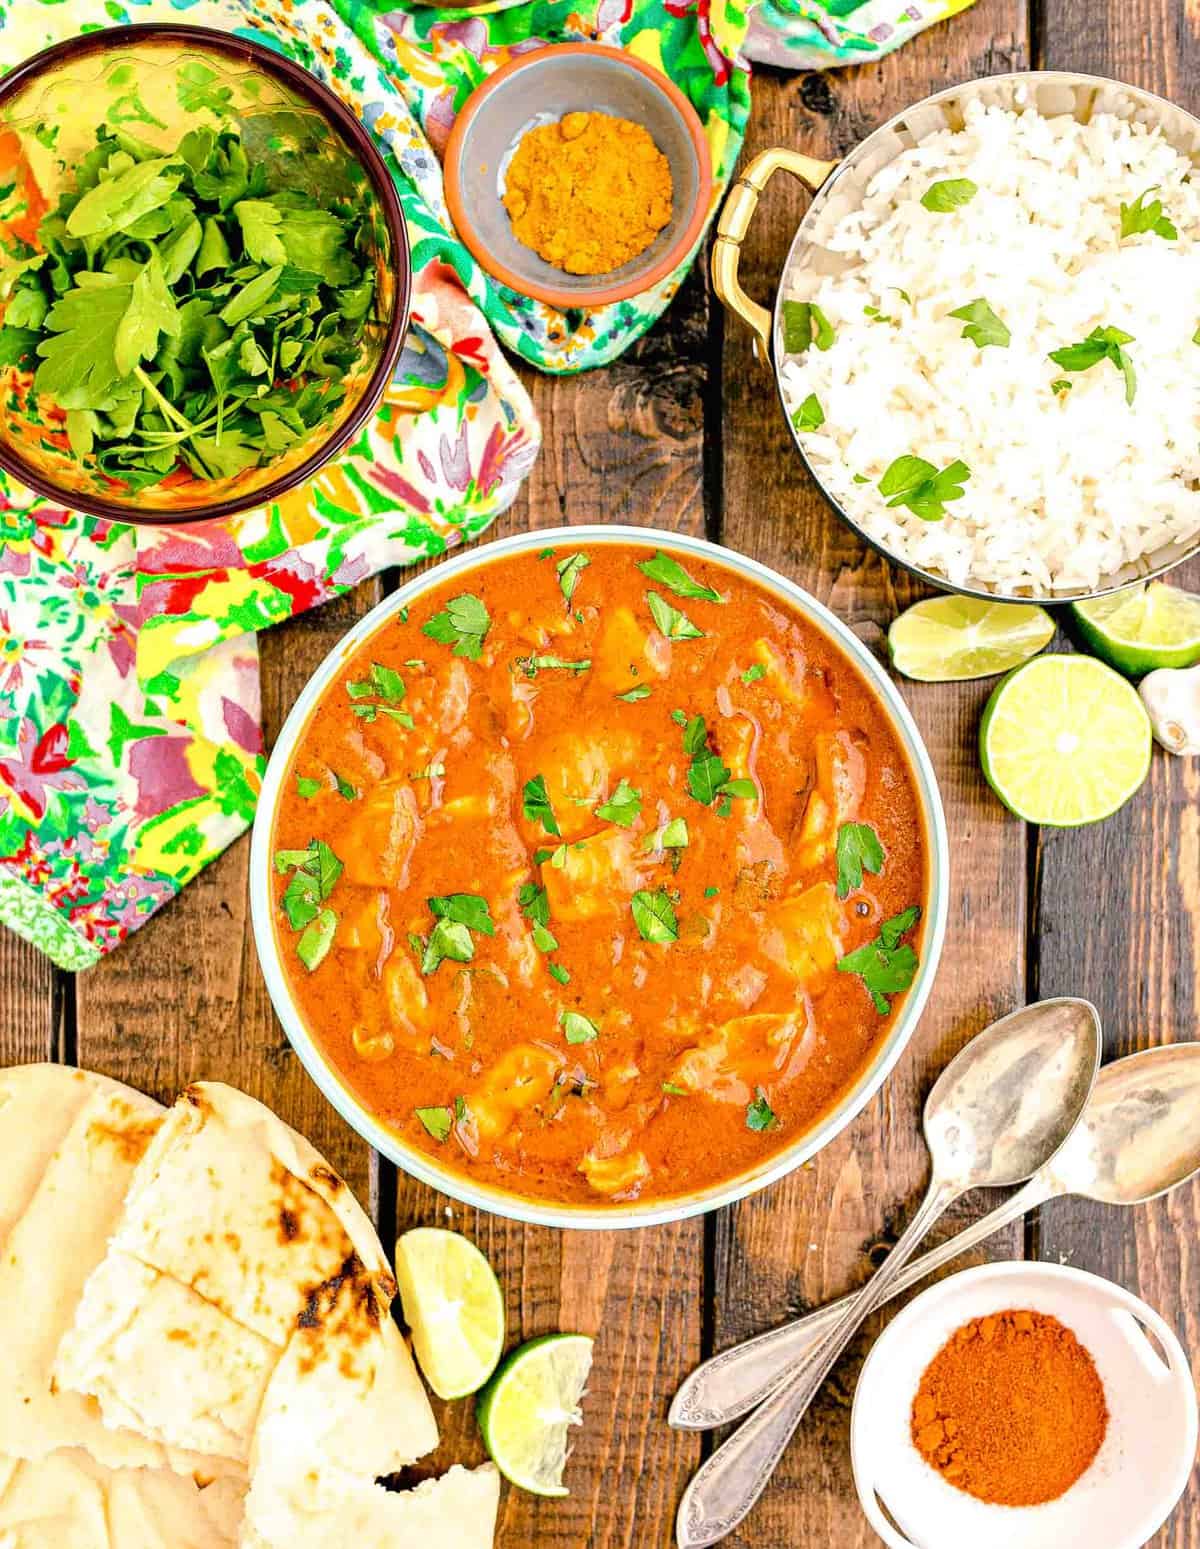 rice, cilantro and limes are placed around a bowl filled with butter chicken.